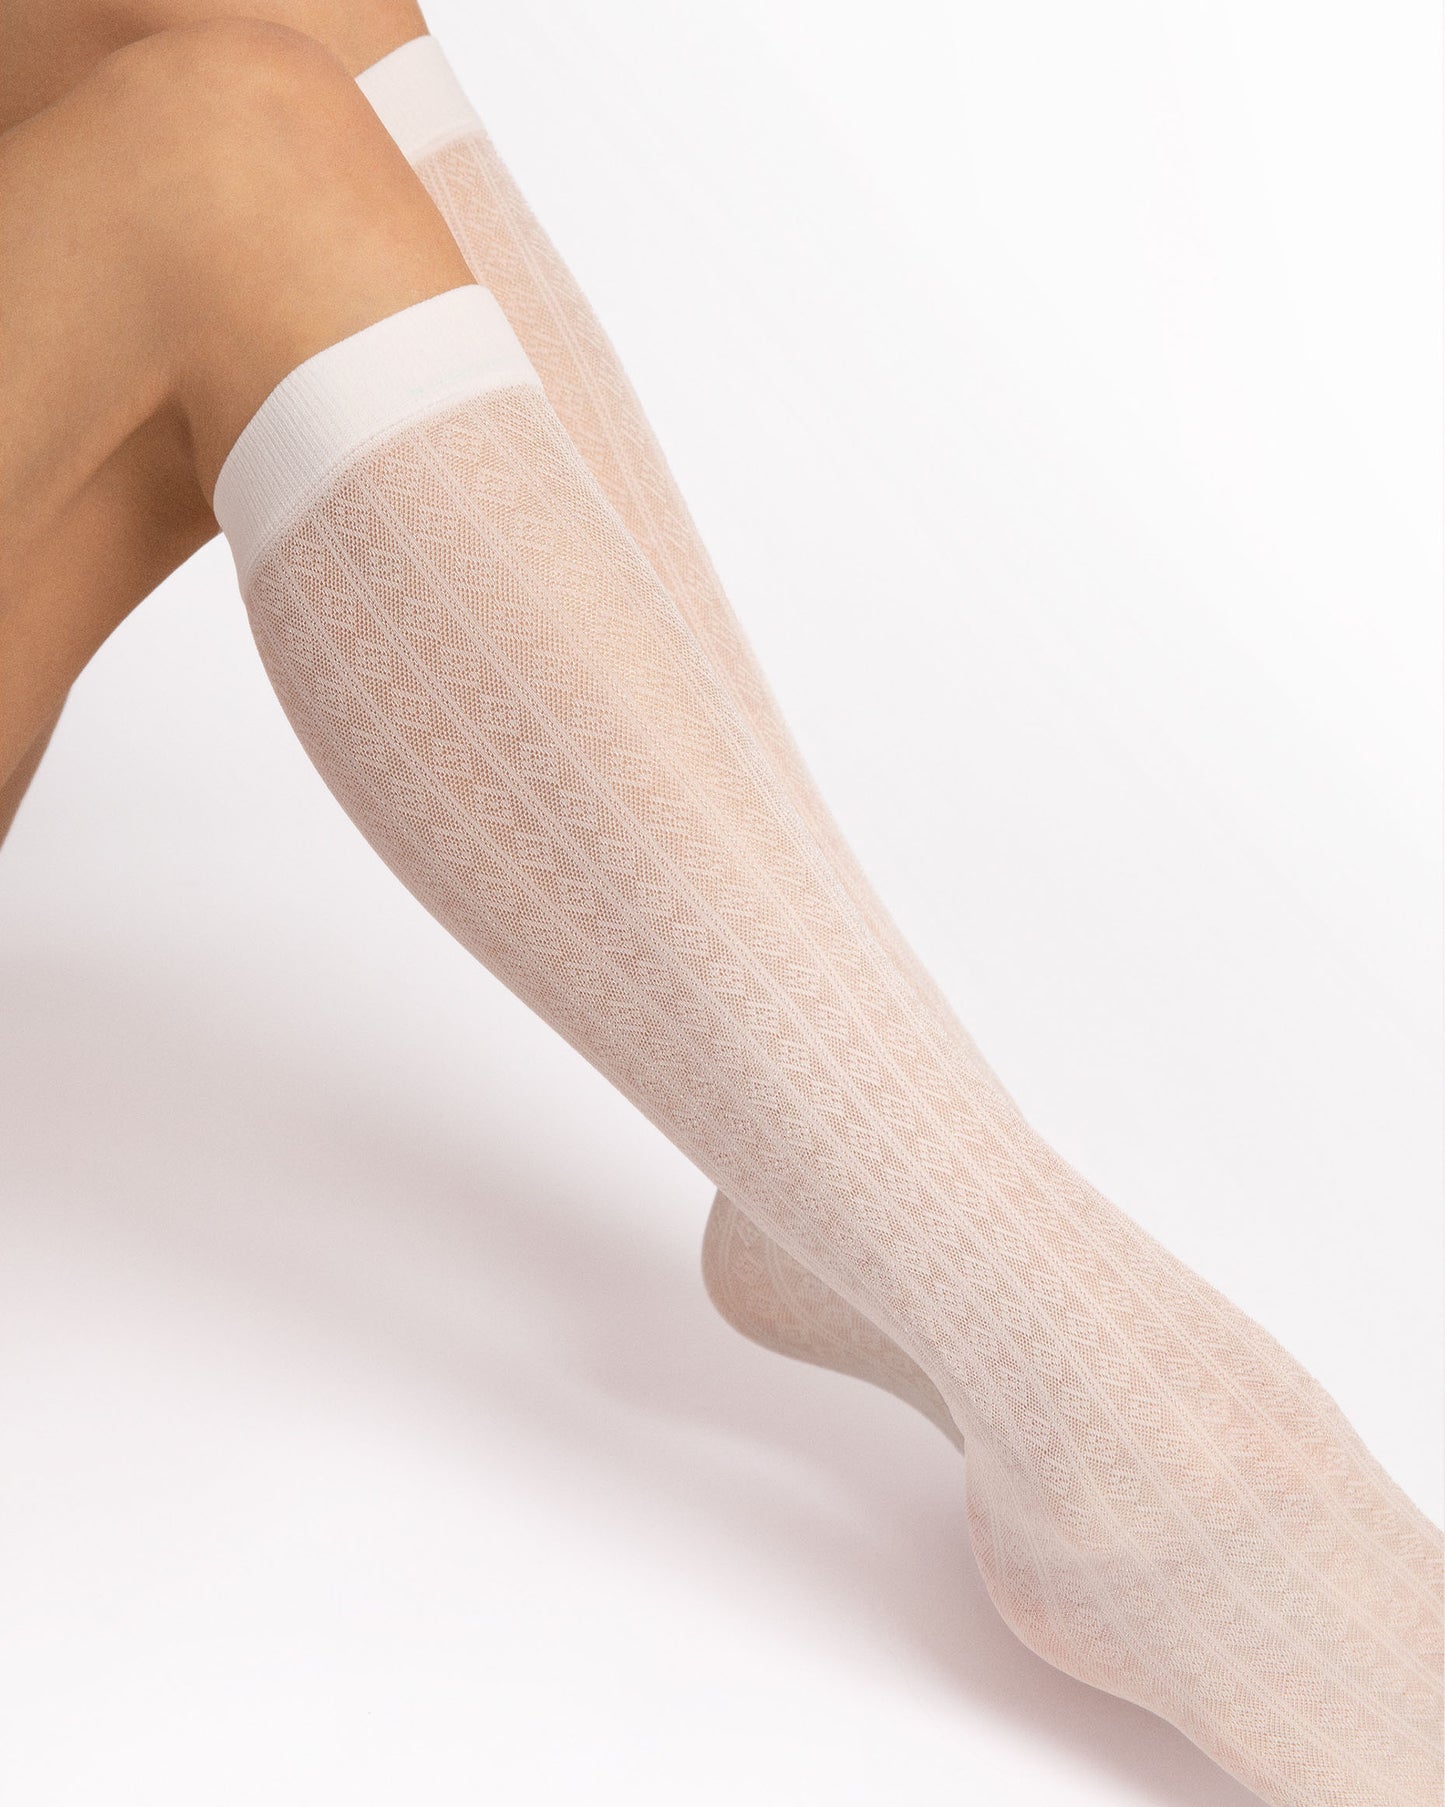 Fiore Diamond Crush 30 Den - Off white semi-sheer micro mesh fashion knee-high socks with a vertical stripe and linear diamond style pattern and plain elasticated cuff.